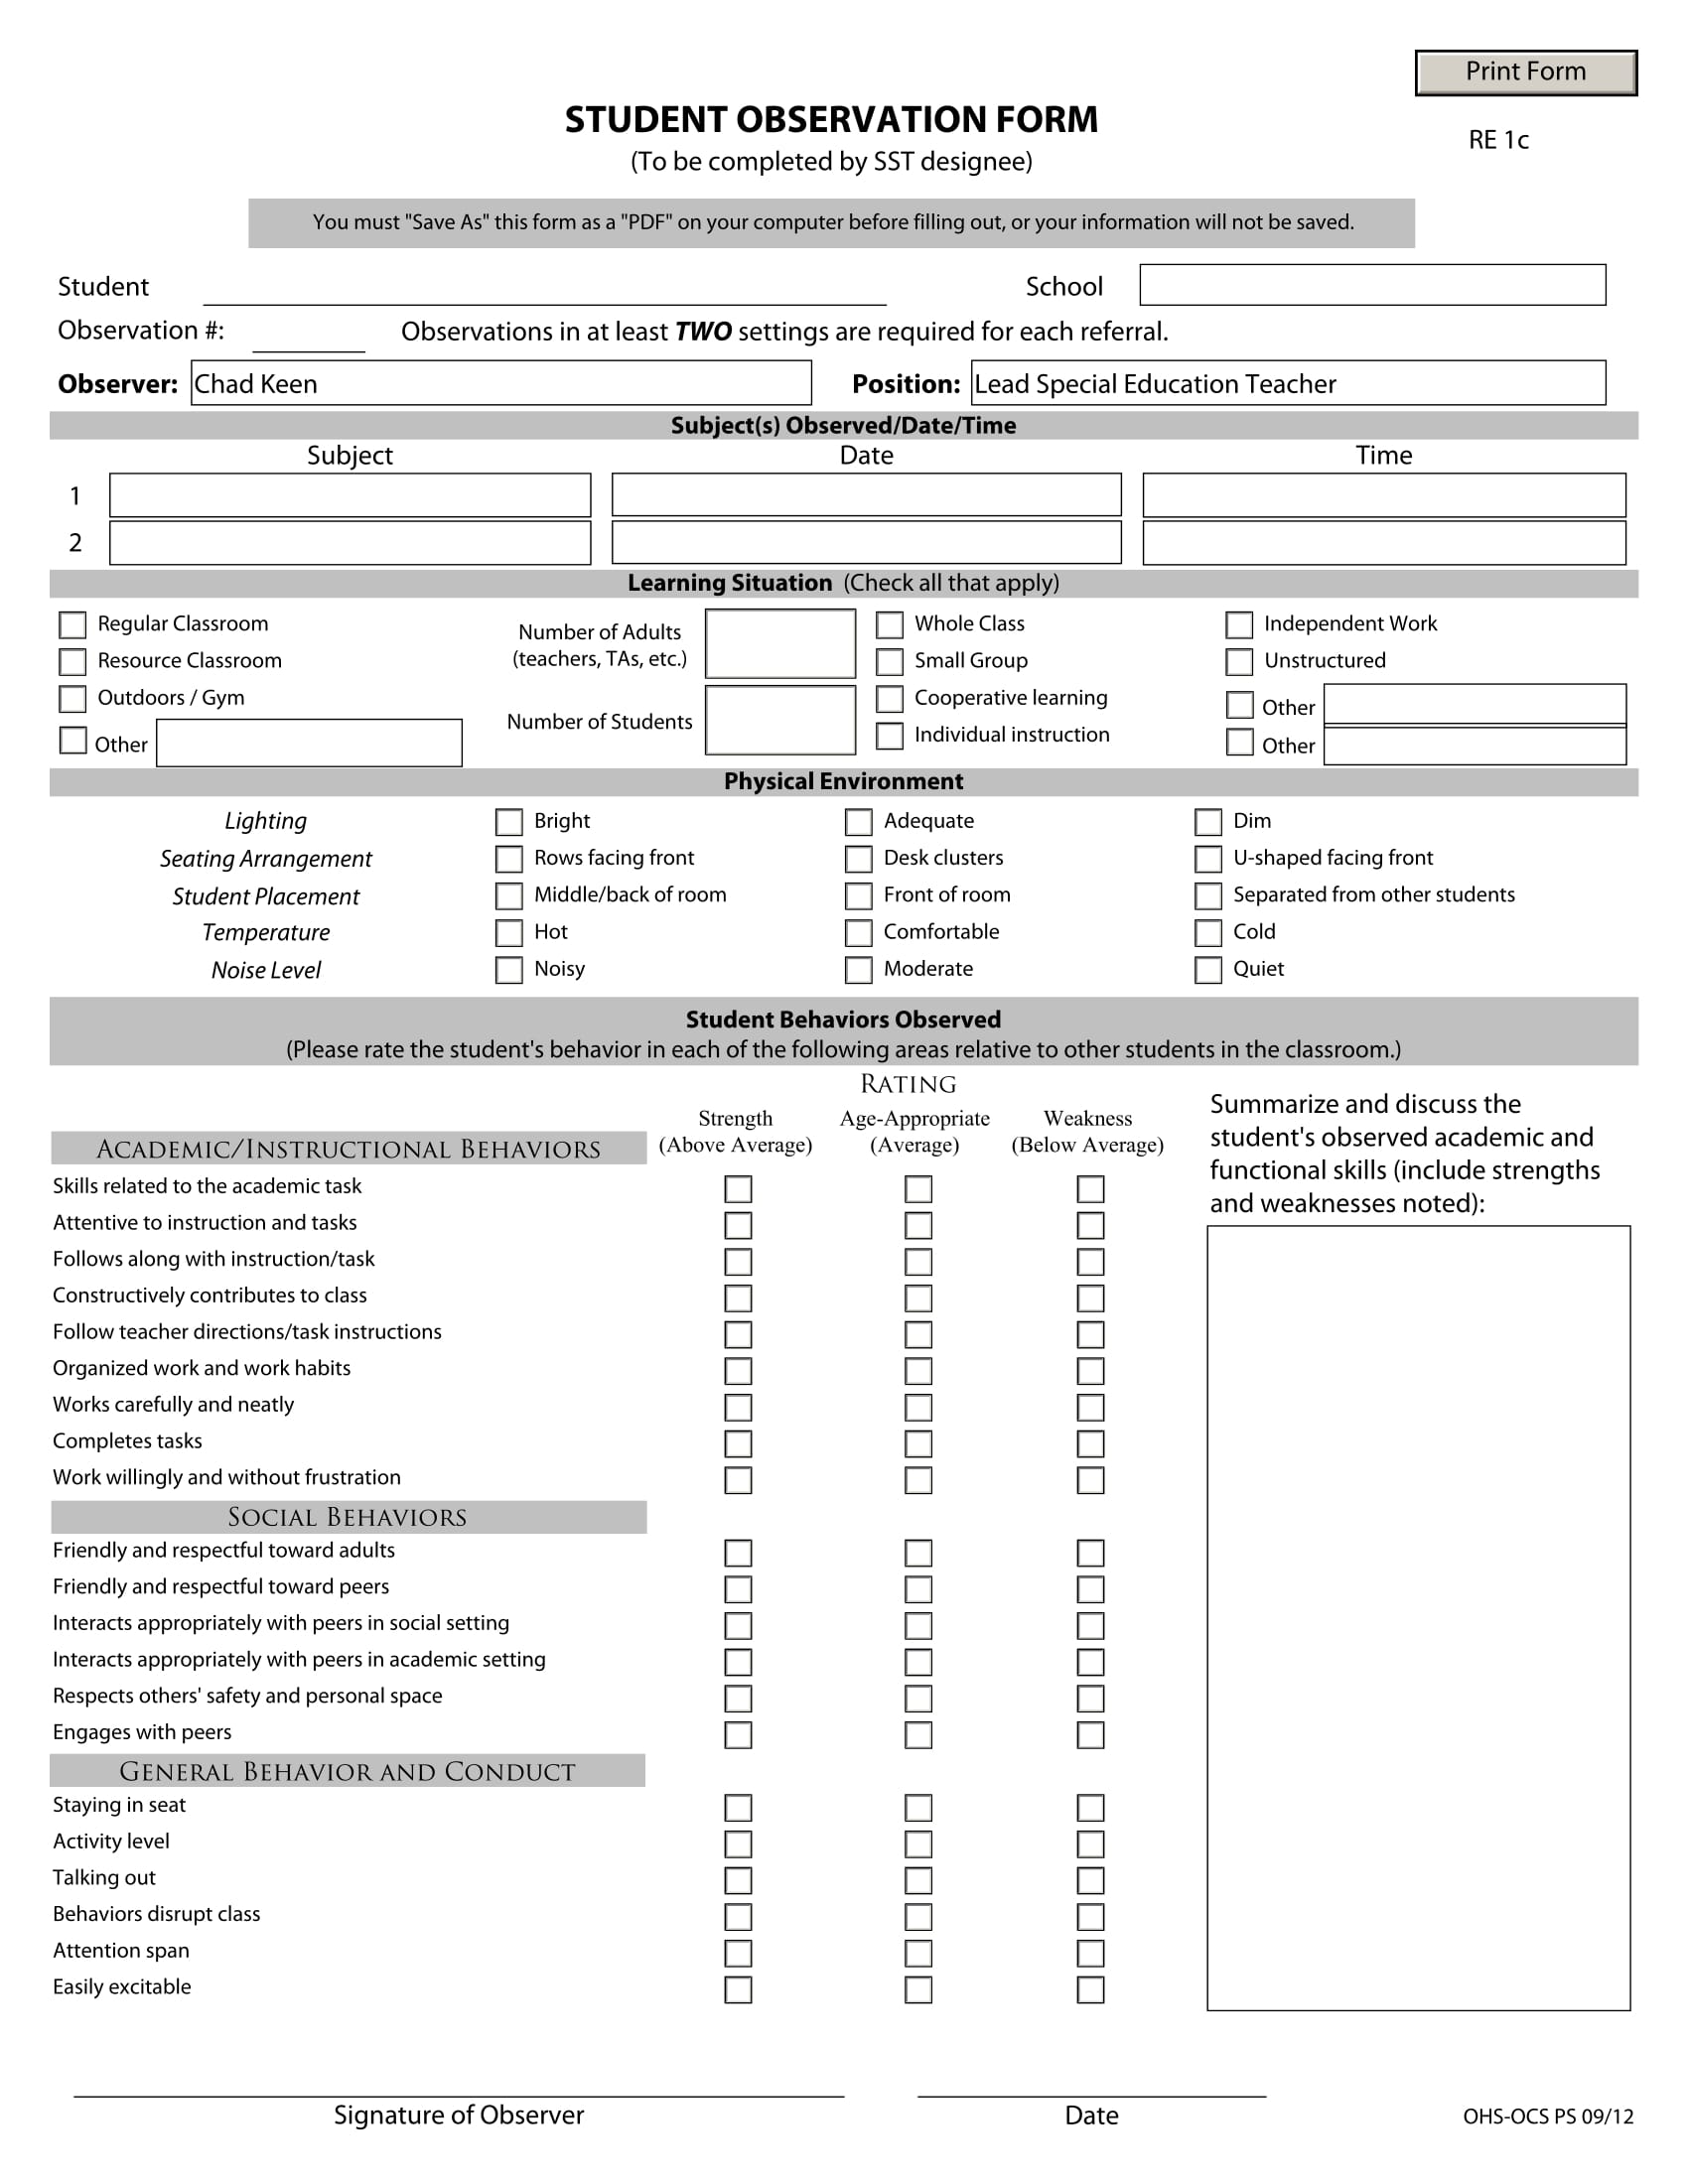 interactive student observation form 1